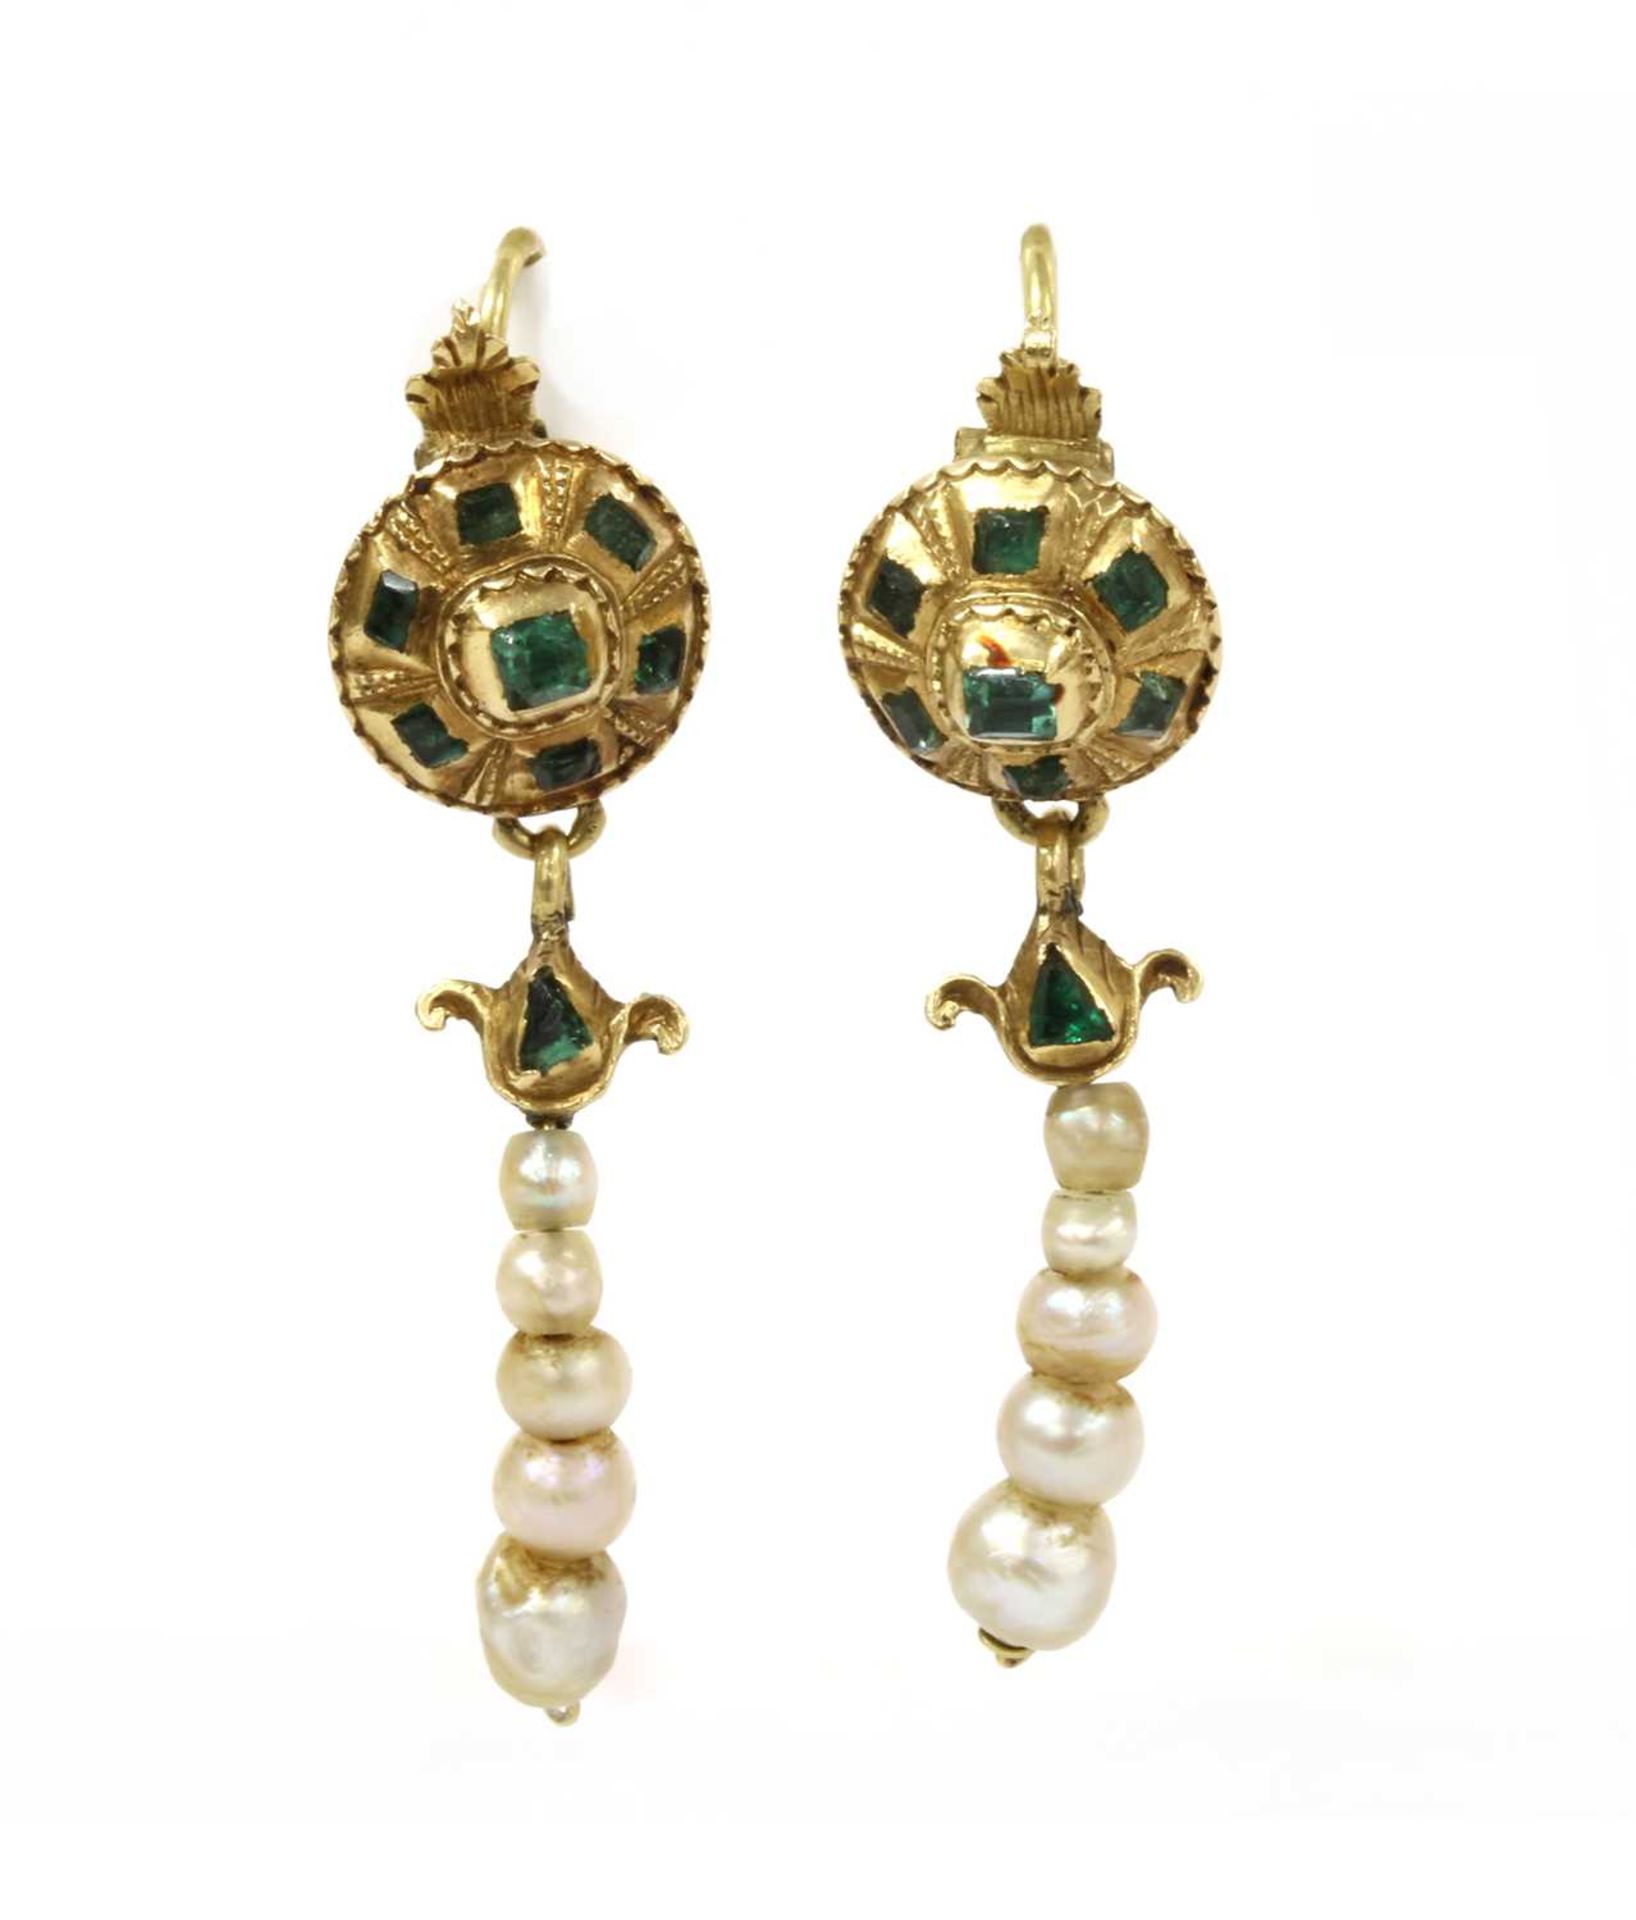 A pair of Continental gold emerald and pearl drop earrings,